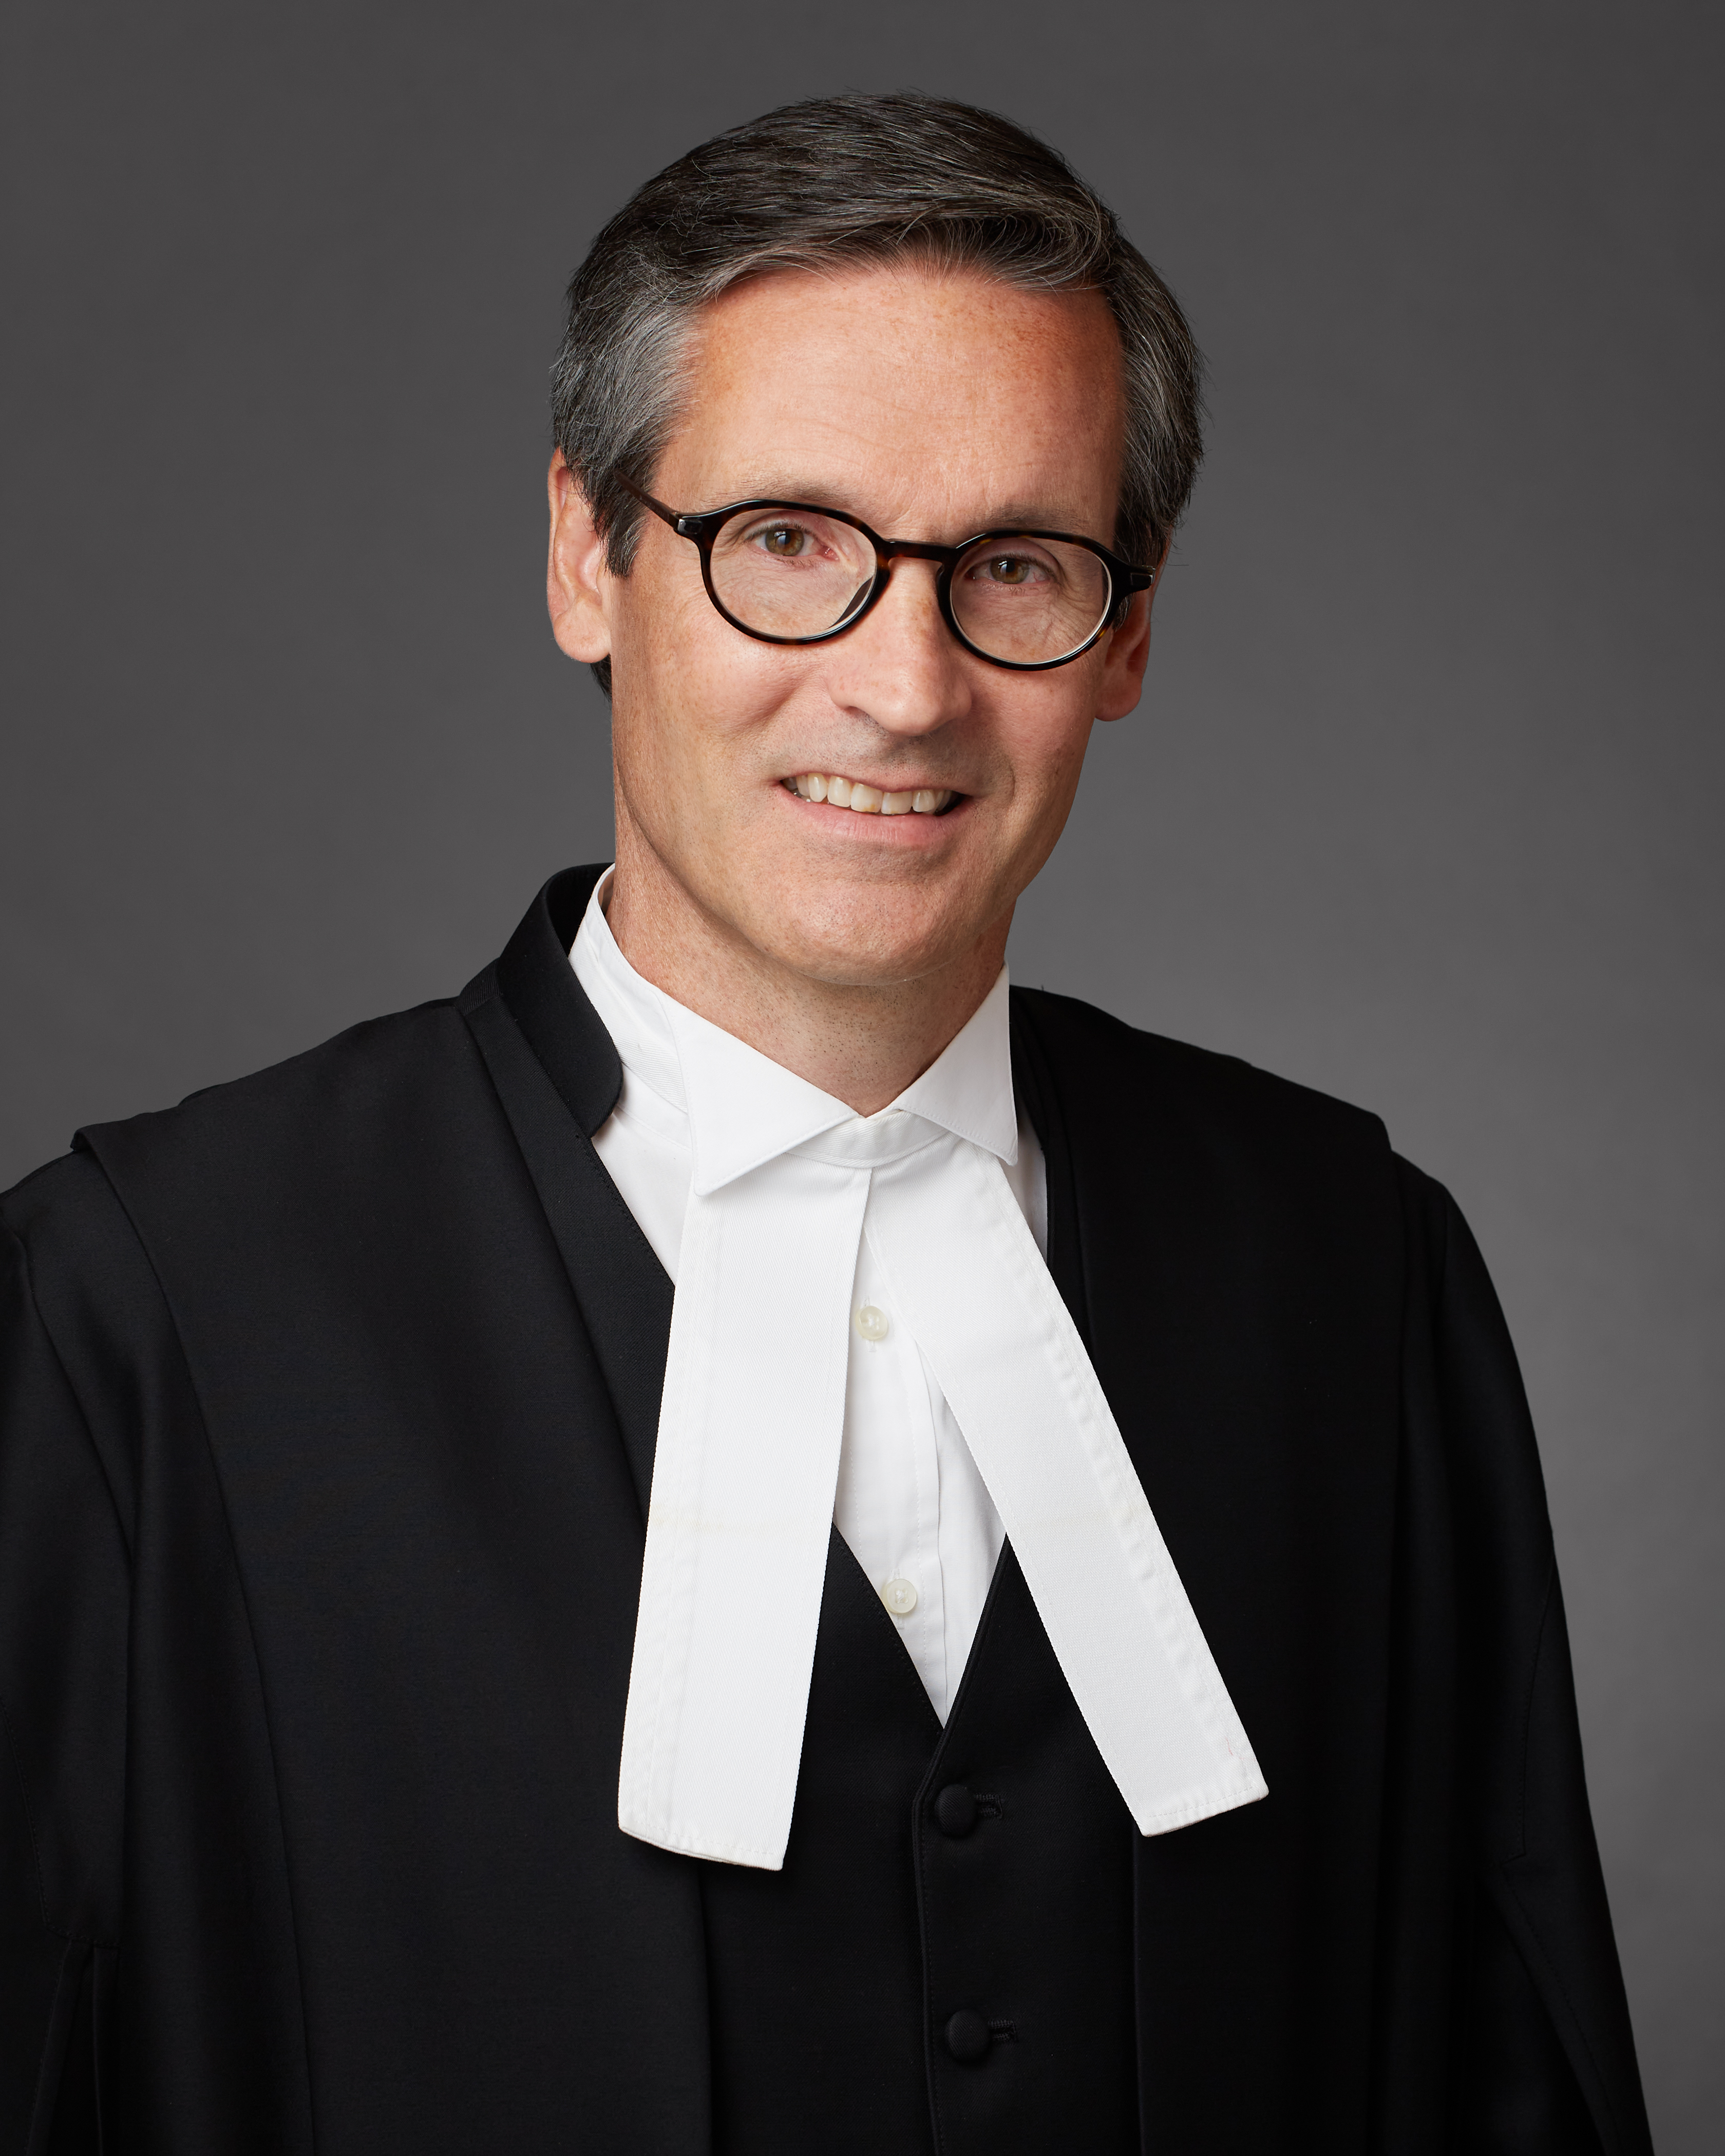 The Hon. Justice Len Marchand, Court of Appeal for British Columbia Profile Photo